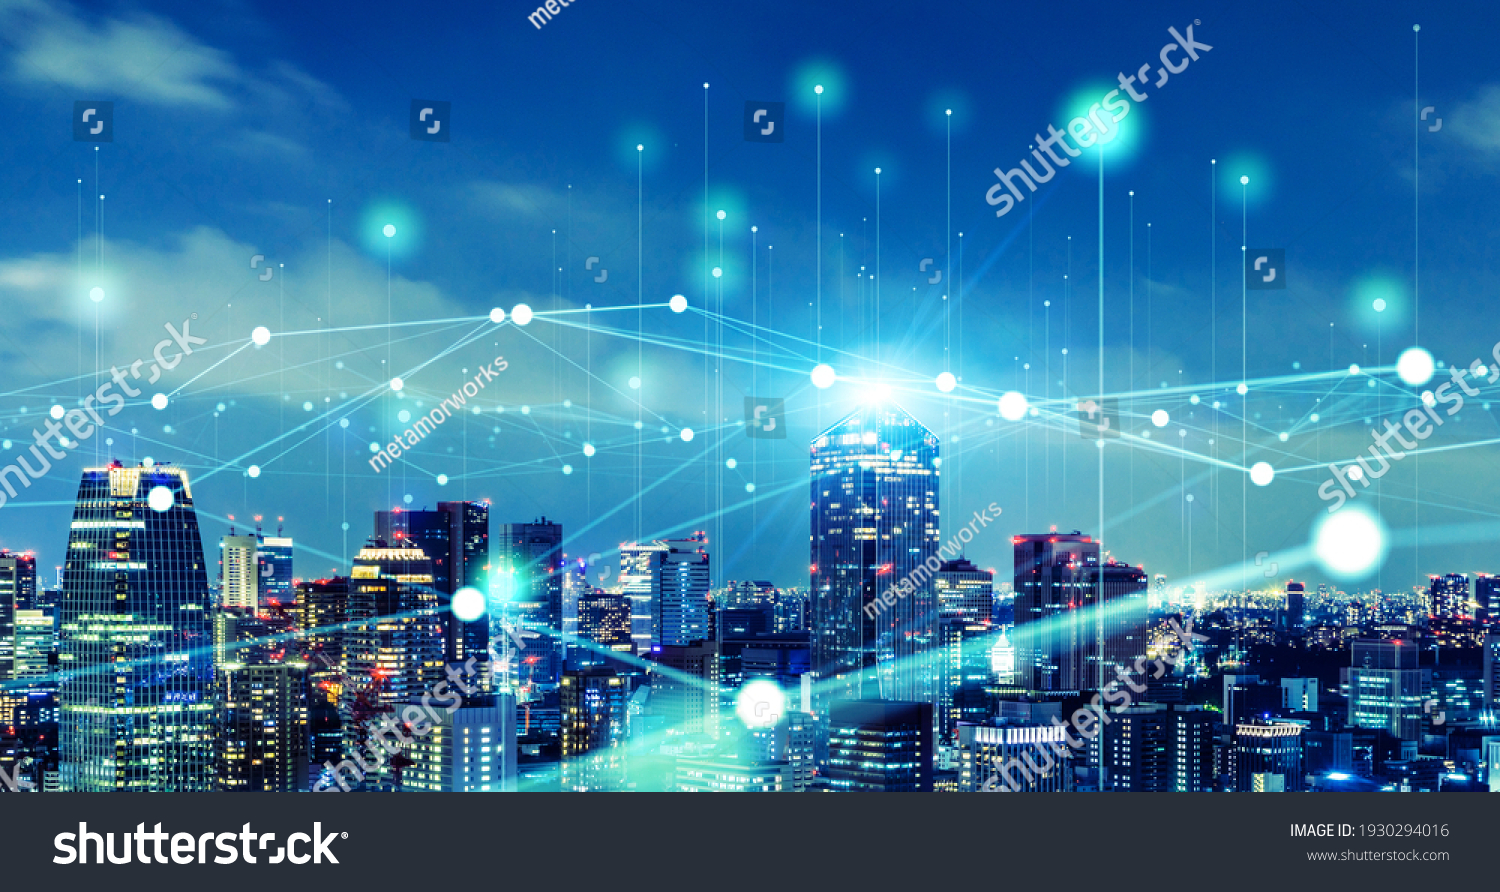 Modern cityscape and communication network concept. Telecommunication. IoT (Internet of Things). ICT (Information communication Technology). 5G. Smart city. Digital transformation. #1930294016